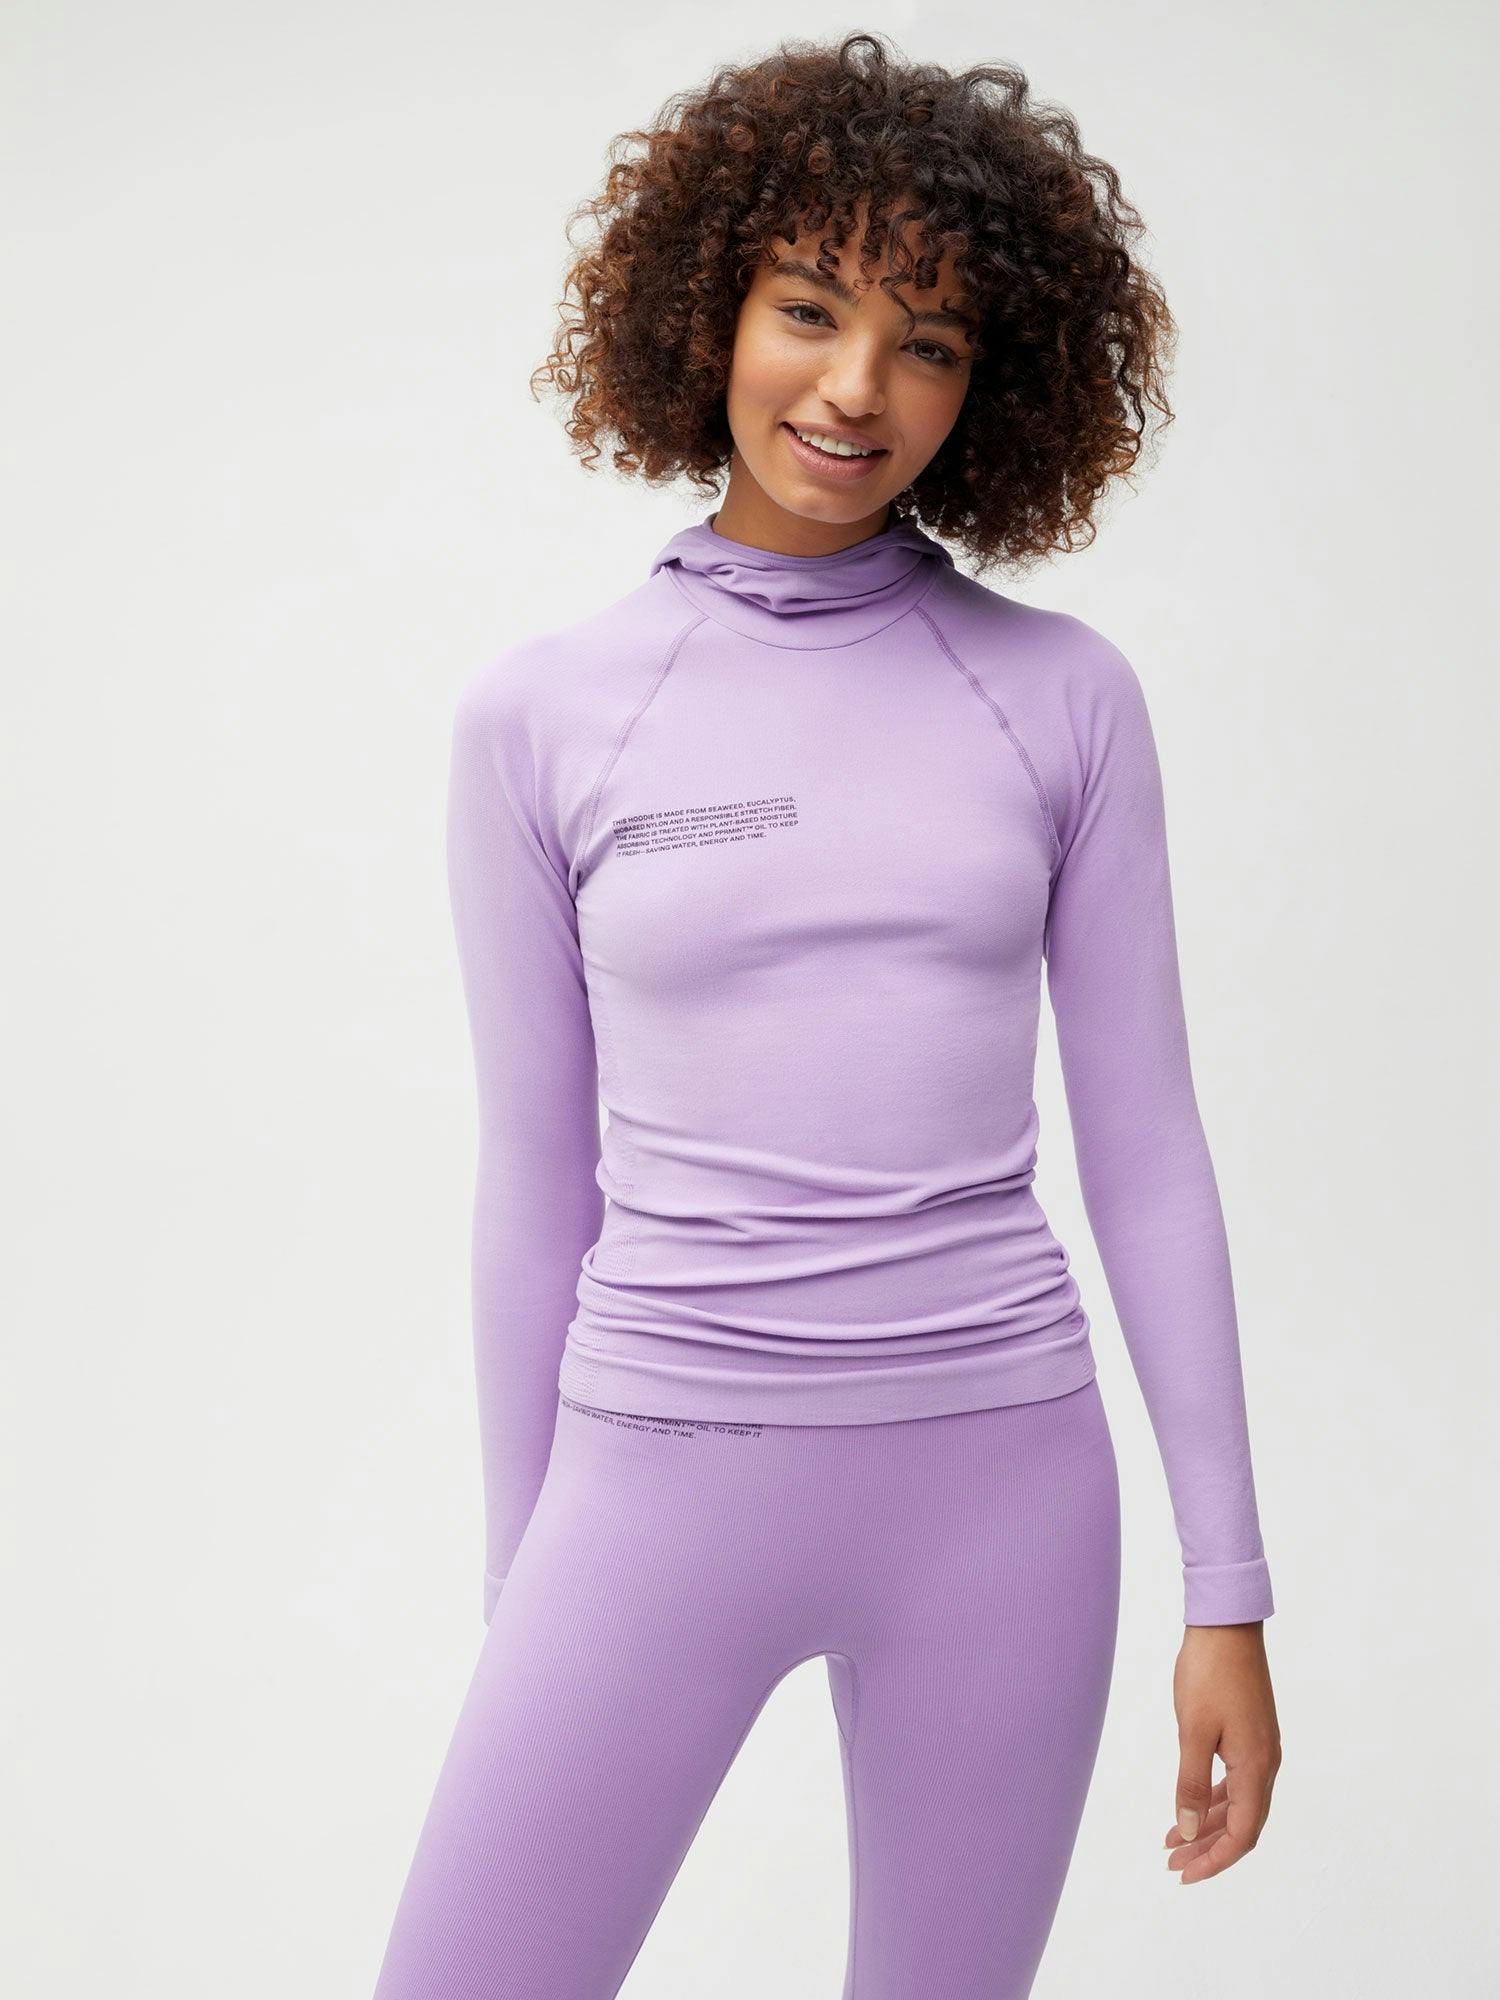 https://cdn.shopify.com/s/files/1/0035/1309/0115/products/Activewear-Womens-Hoodie-Orchid-Purple-1_74594f6d-a5a7-4c27-a191-692843029eb4.jpg?v=1662475871